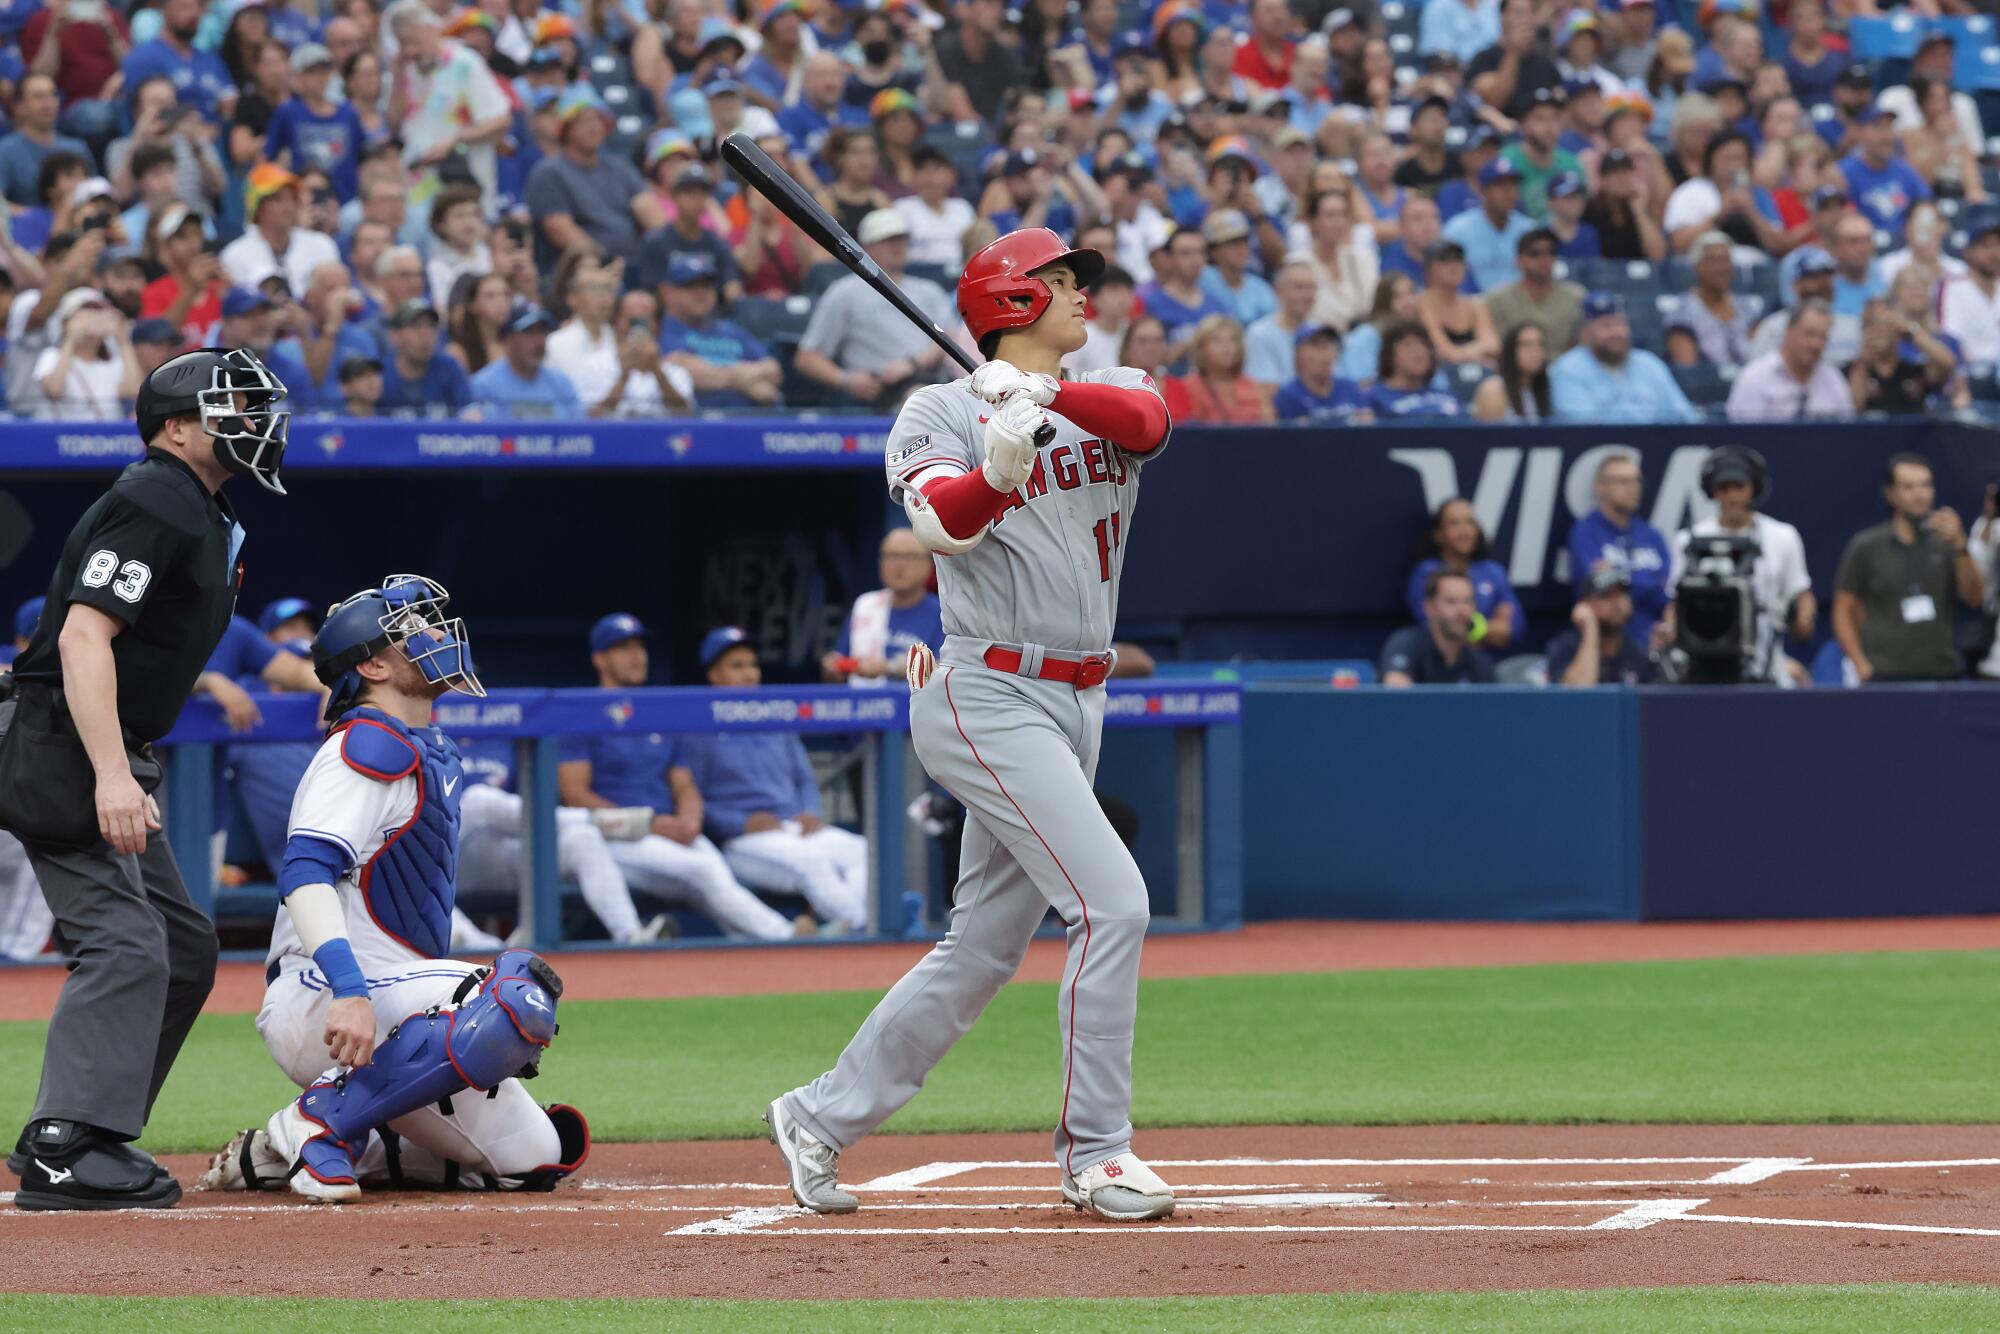 Shohei Ohtani hits a home run for the Angels at Toronto.